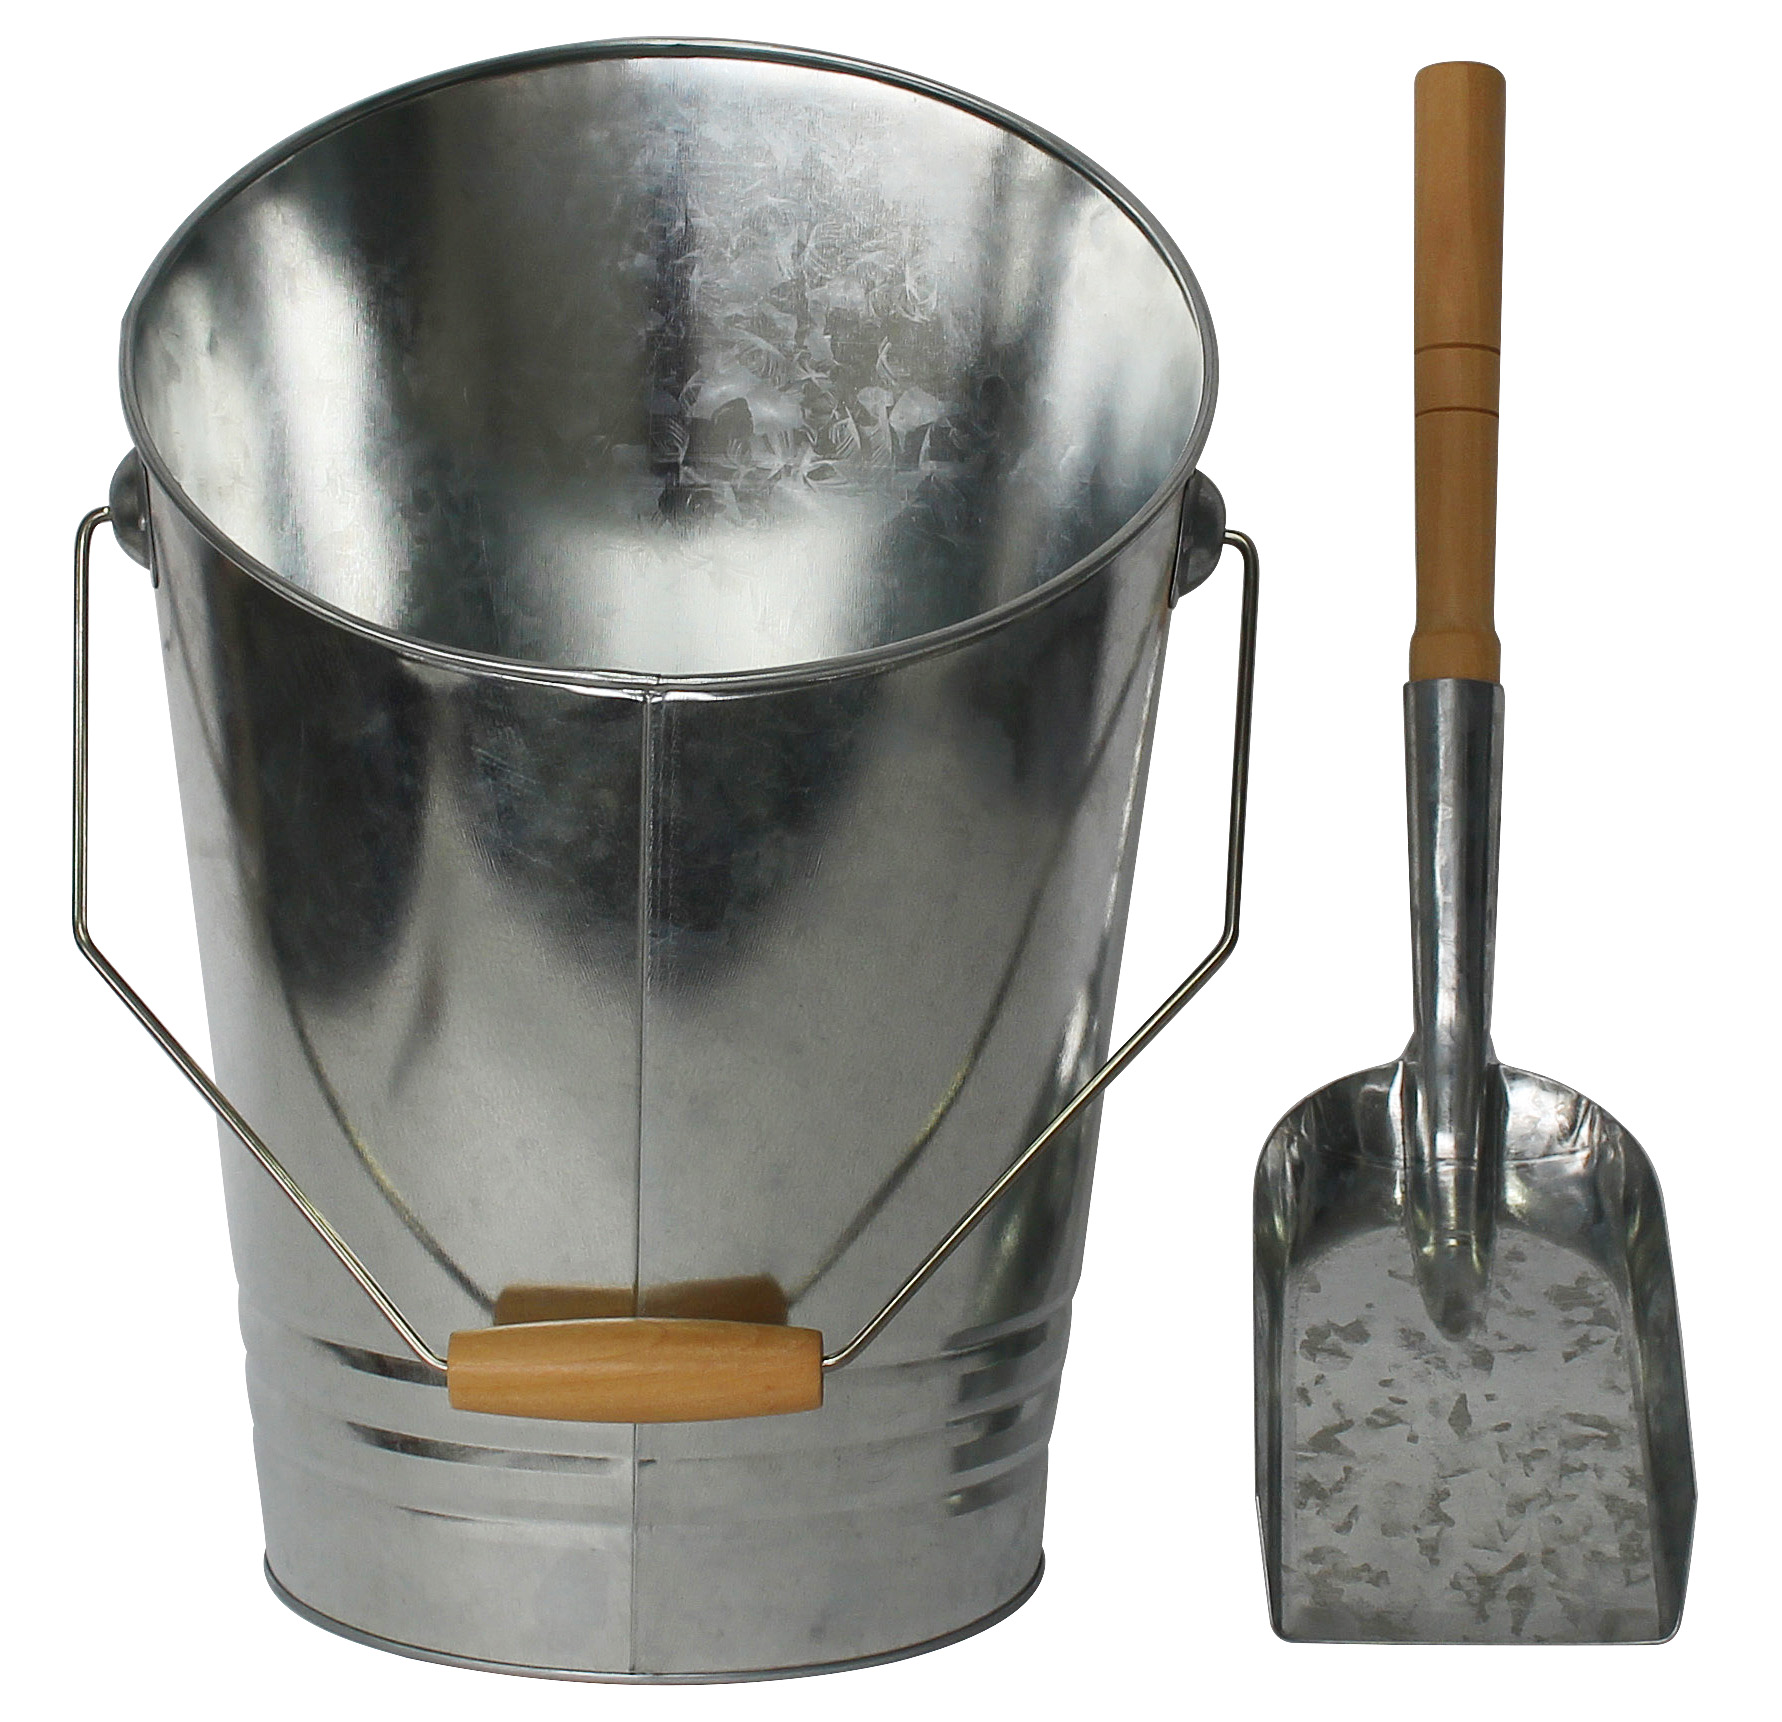 The Fireplace ash bucket is a functional and durable product that is a great addition to any fireplace